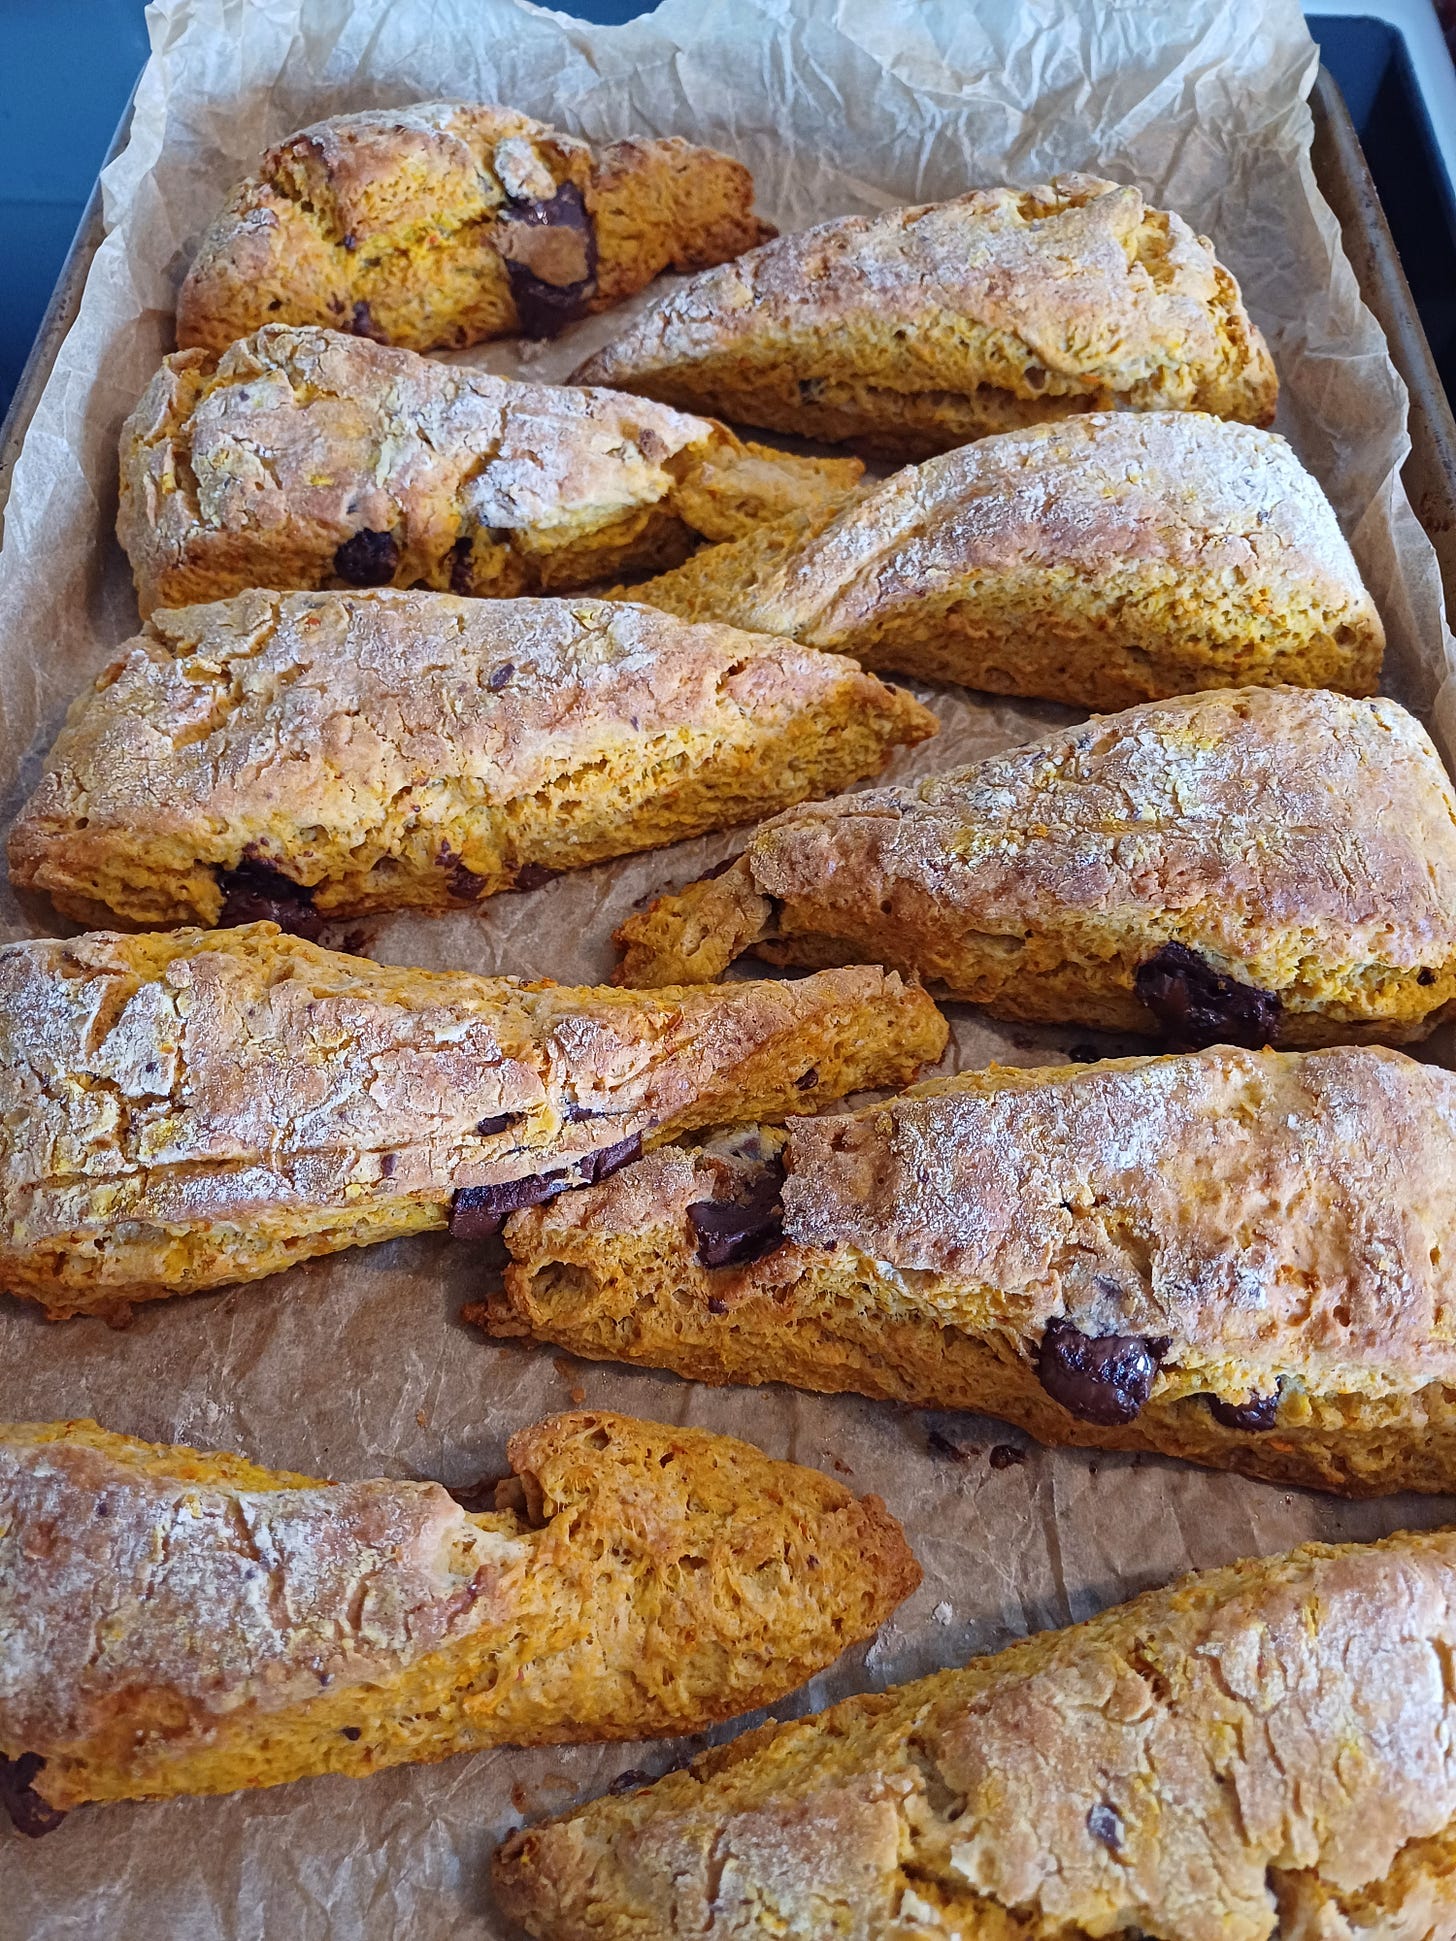 A row of triangular scones on a baking tray, slightly orange, studded with dark chocolate and dusted with flour.